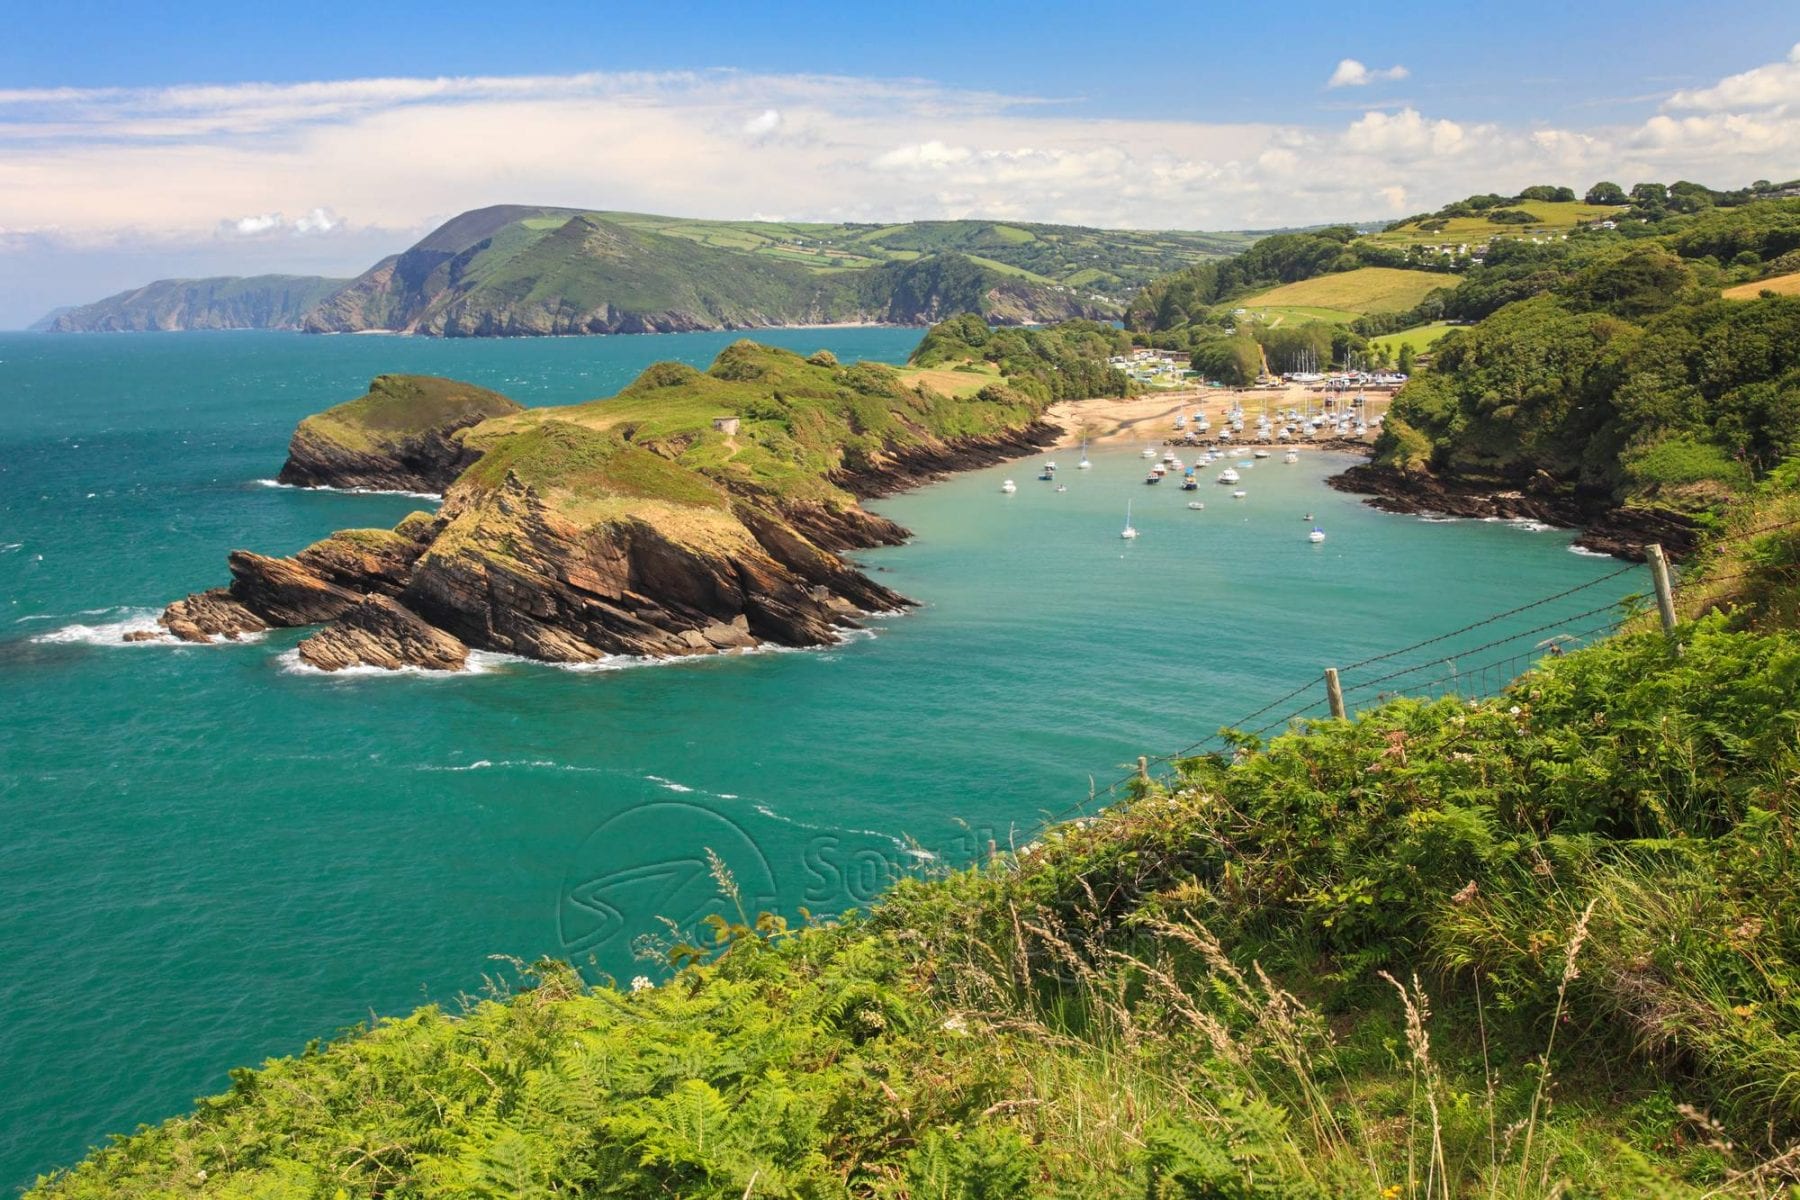 a picture of Watermouth coastal path with boats resting on the blue sea and green rocky cliffs surrounding the cove